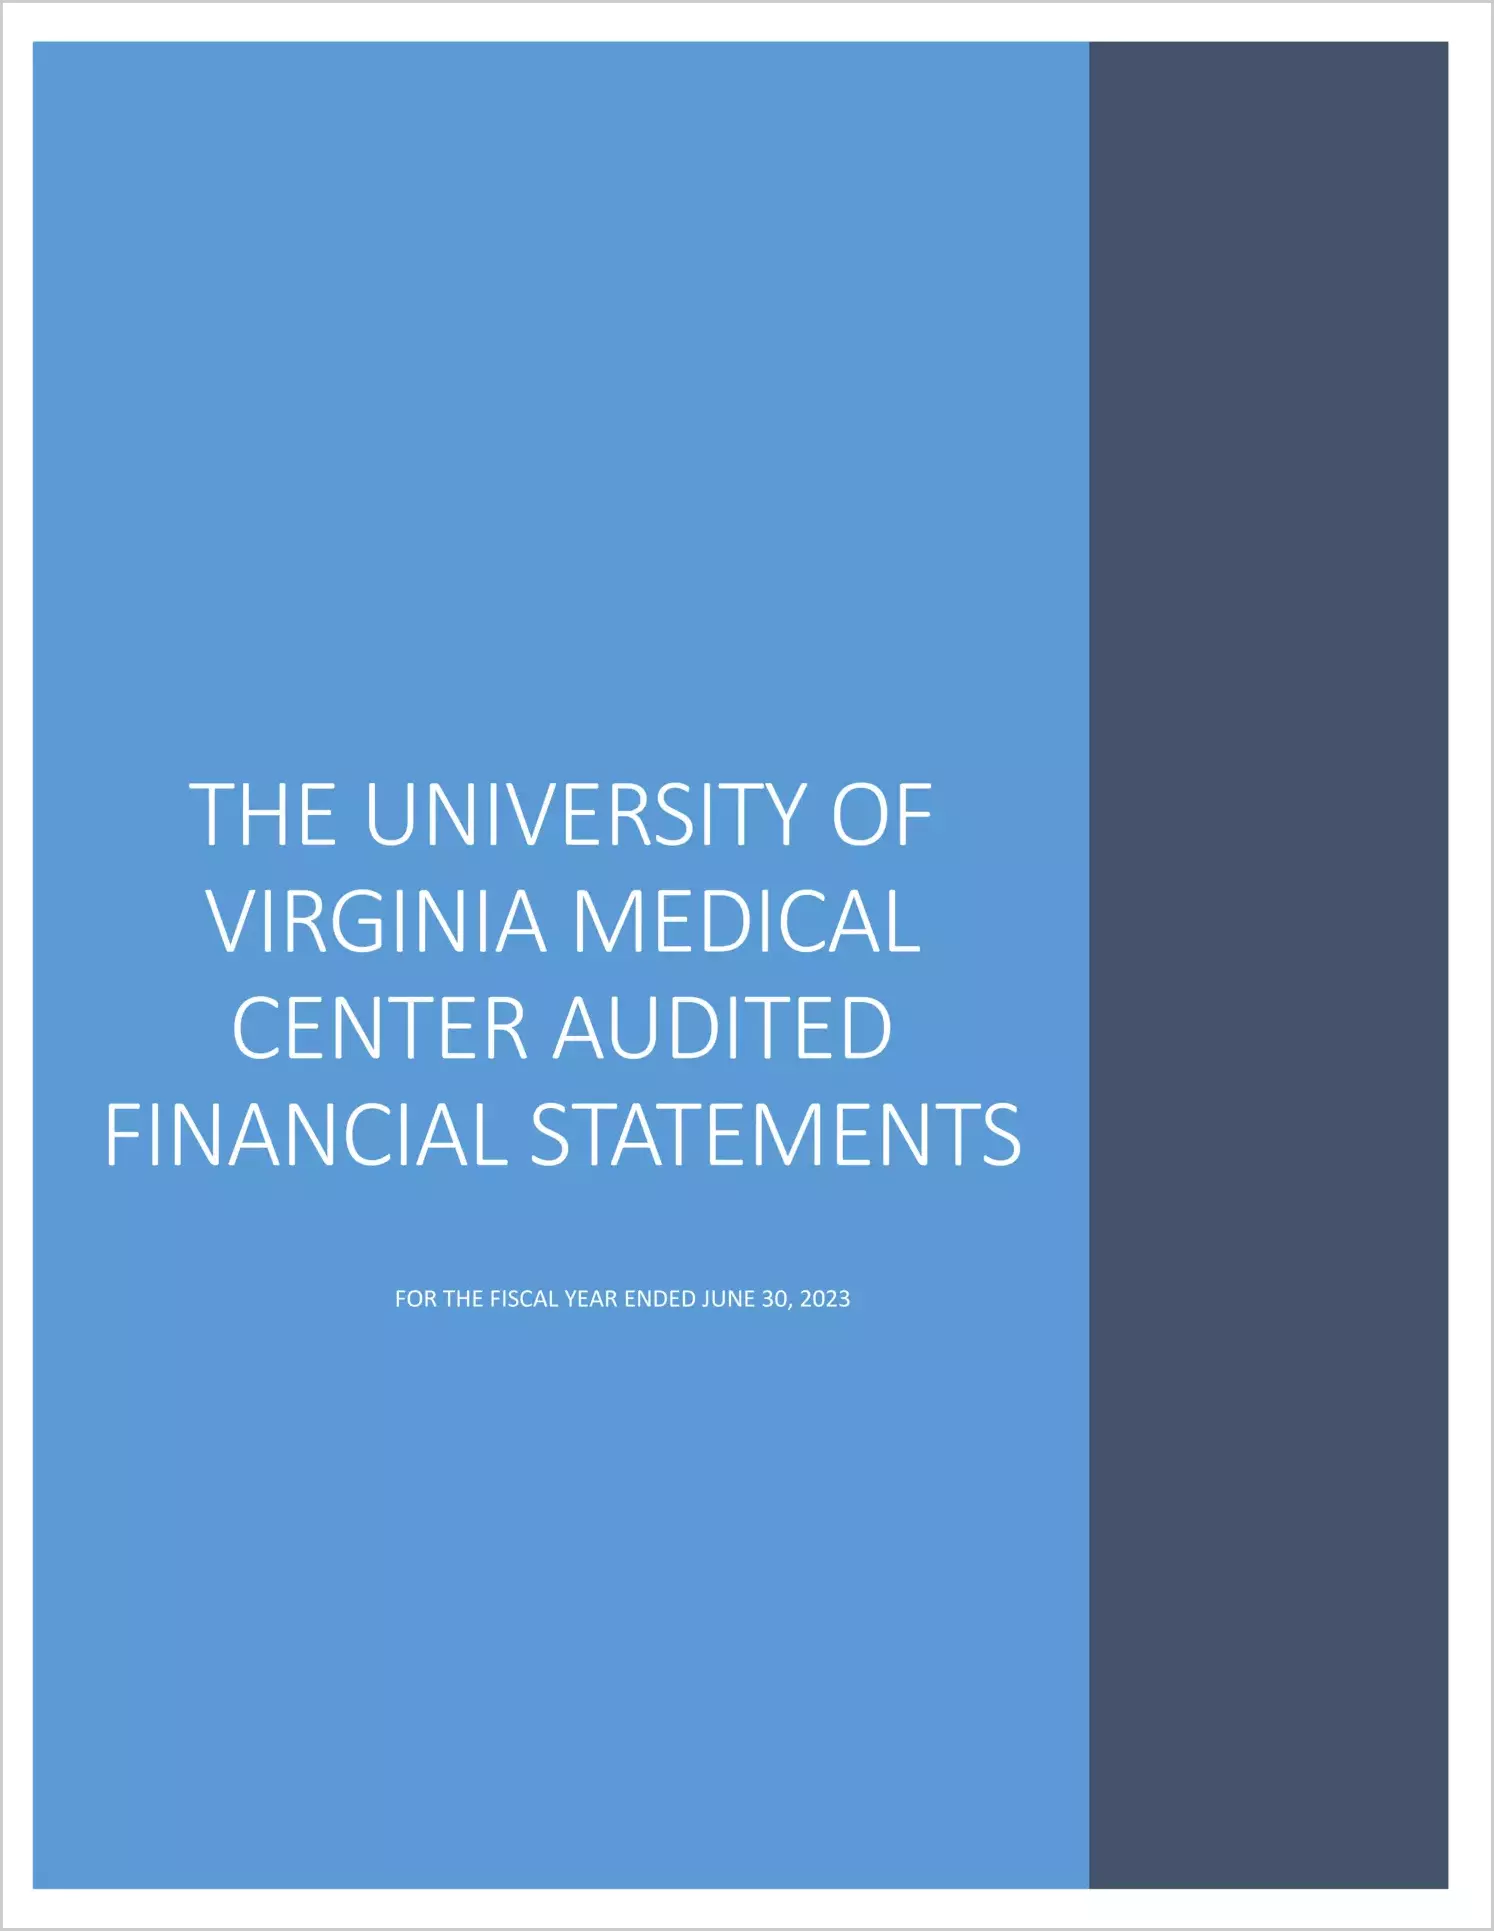 The University of Virginia Medical Center Financial Statements for the year ended June 30, 2023